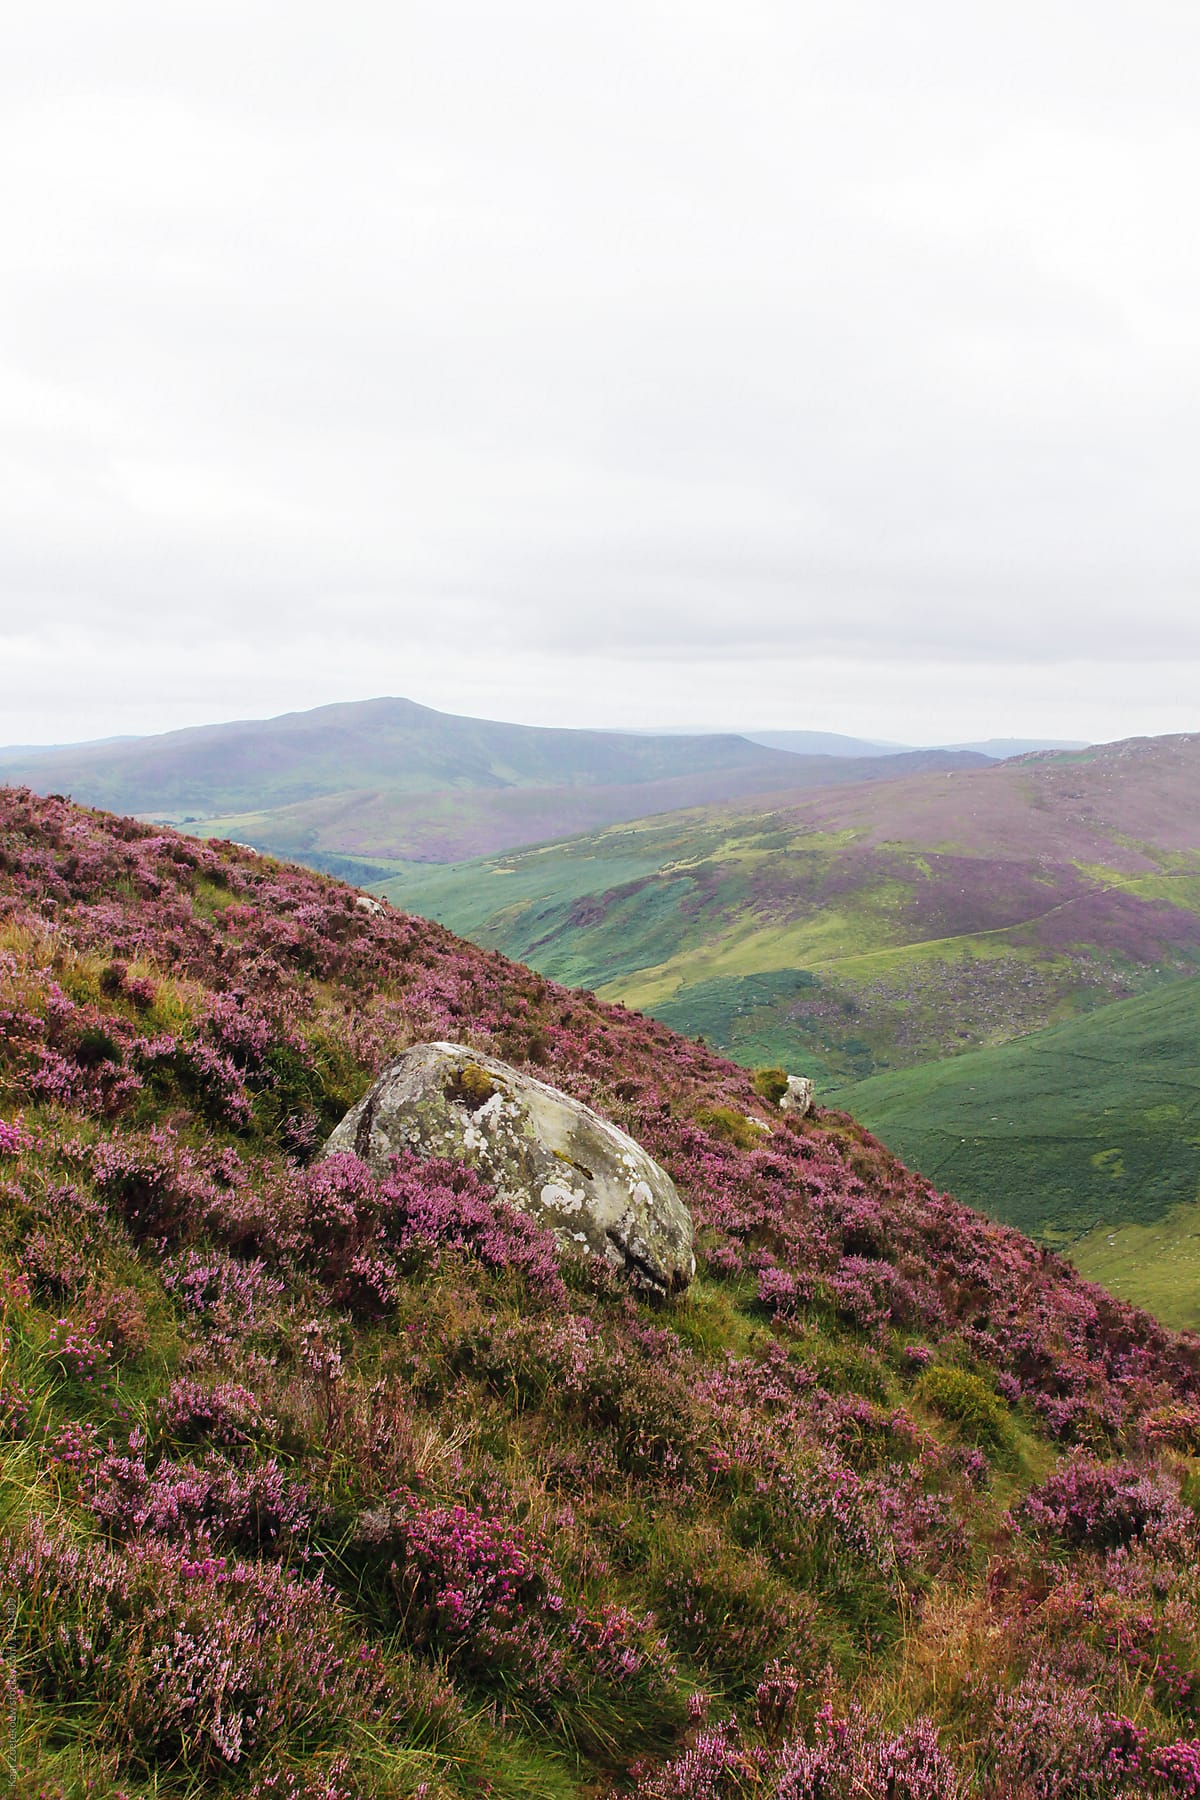 The beautiful colorful landscape of Wicklow Mountains National Park, Ireland, on an overcast day